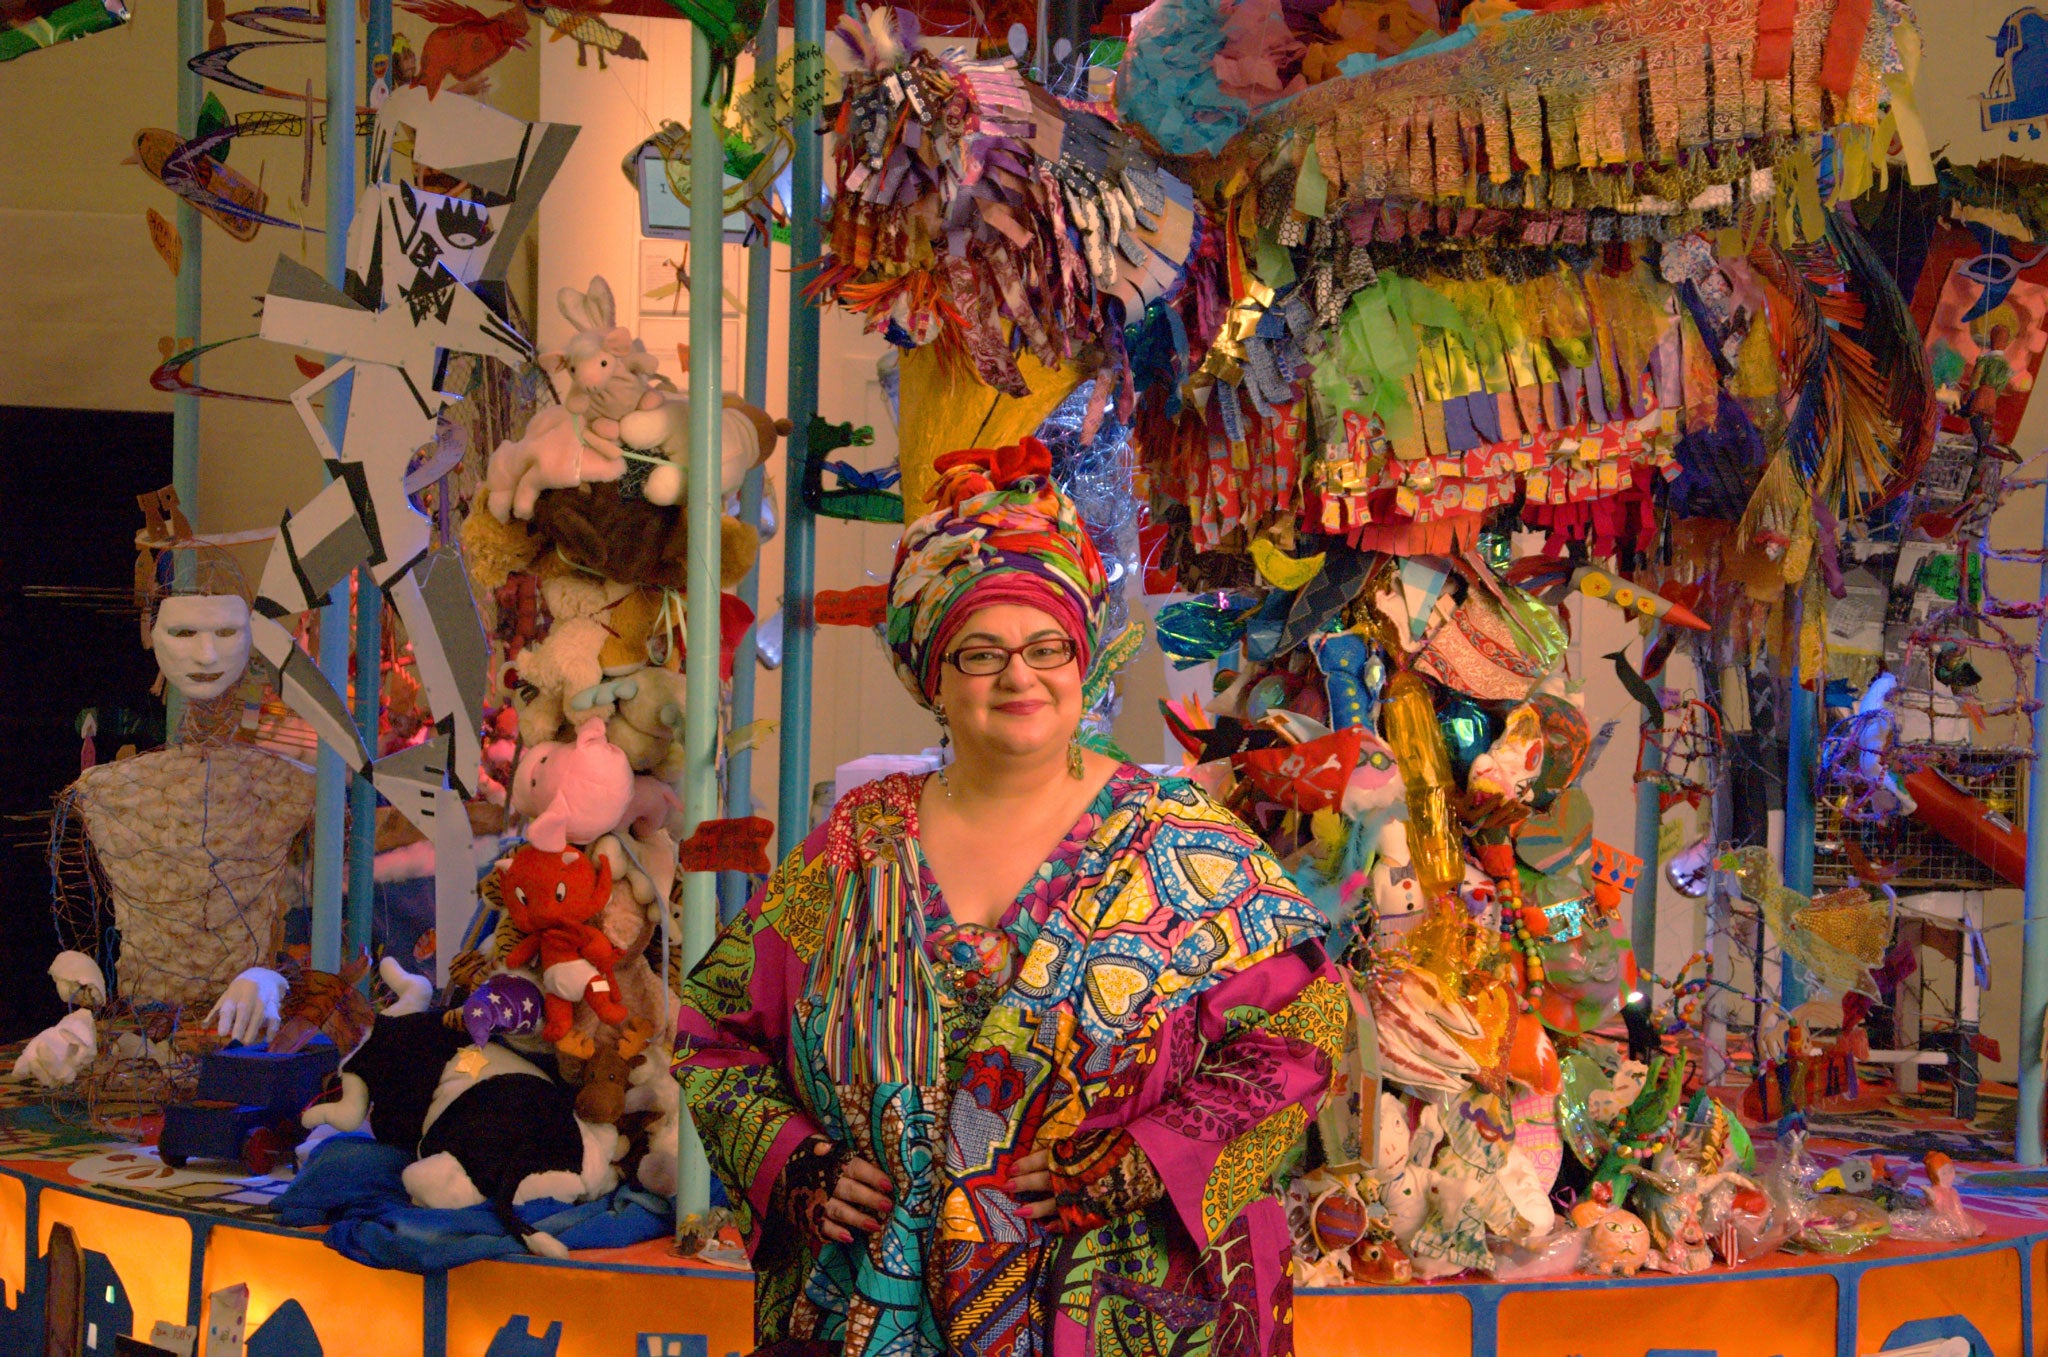 Camila Batmanghelidjh these days makes her colourful outfits out of fabrics that Kids Company children find in skips or charity shops